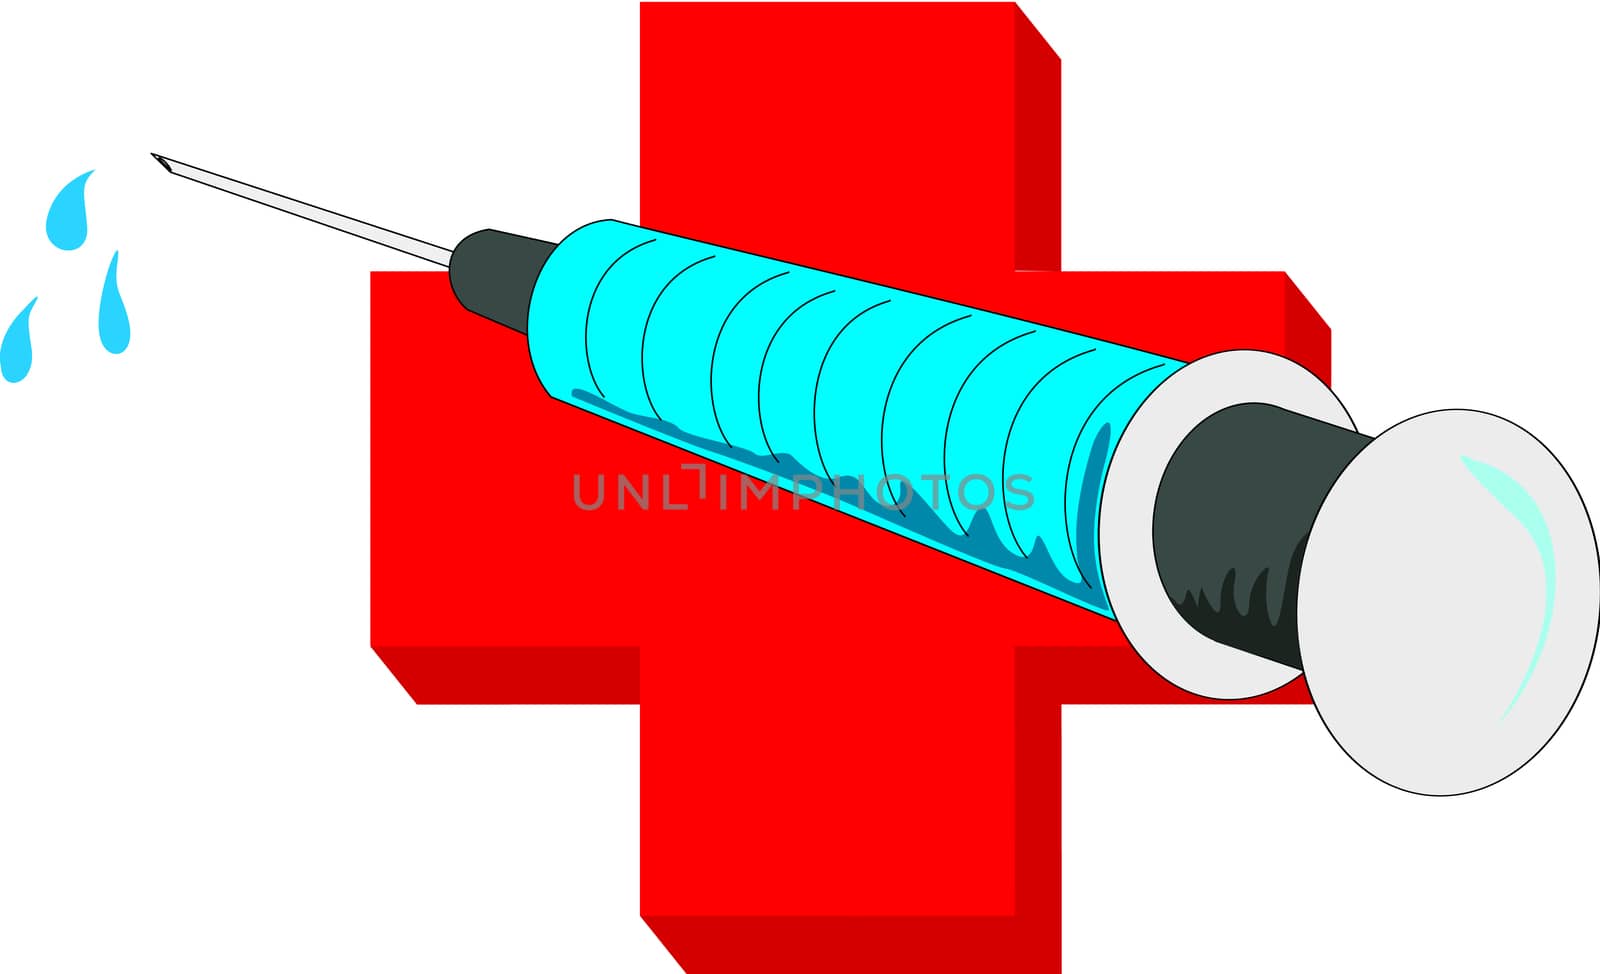 Syringe with fluid is placed in front of a red cross as an example of a strong aid against diseases.